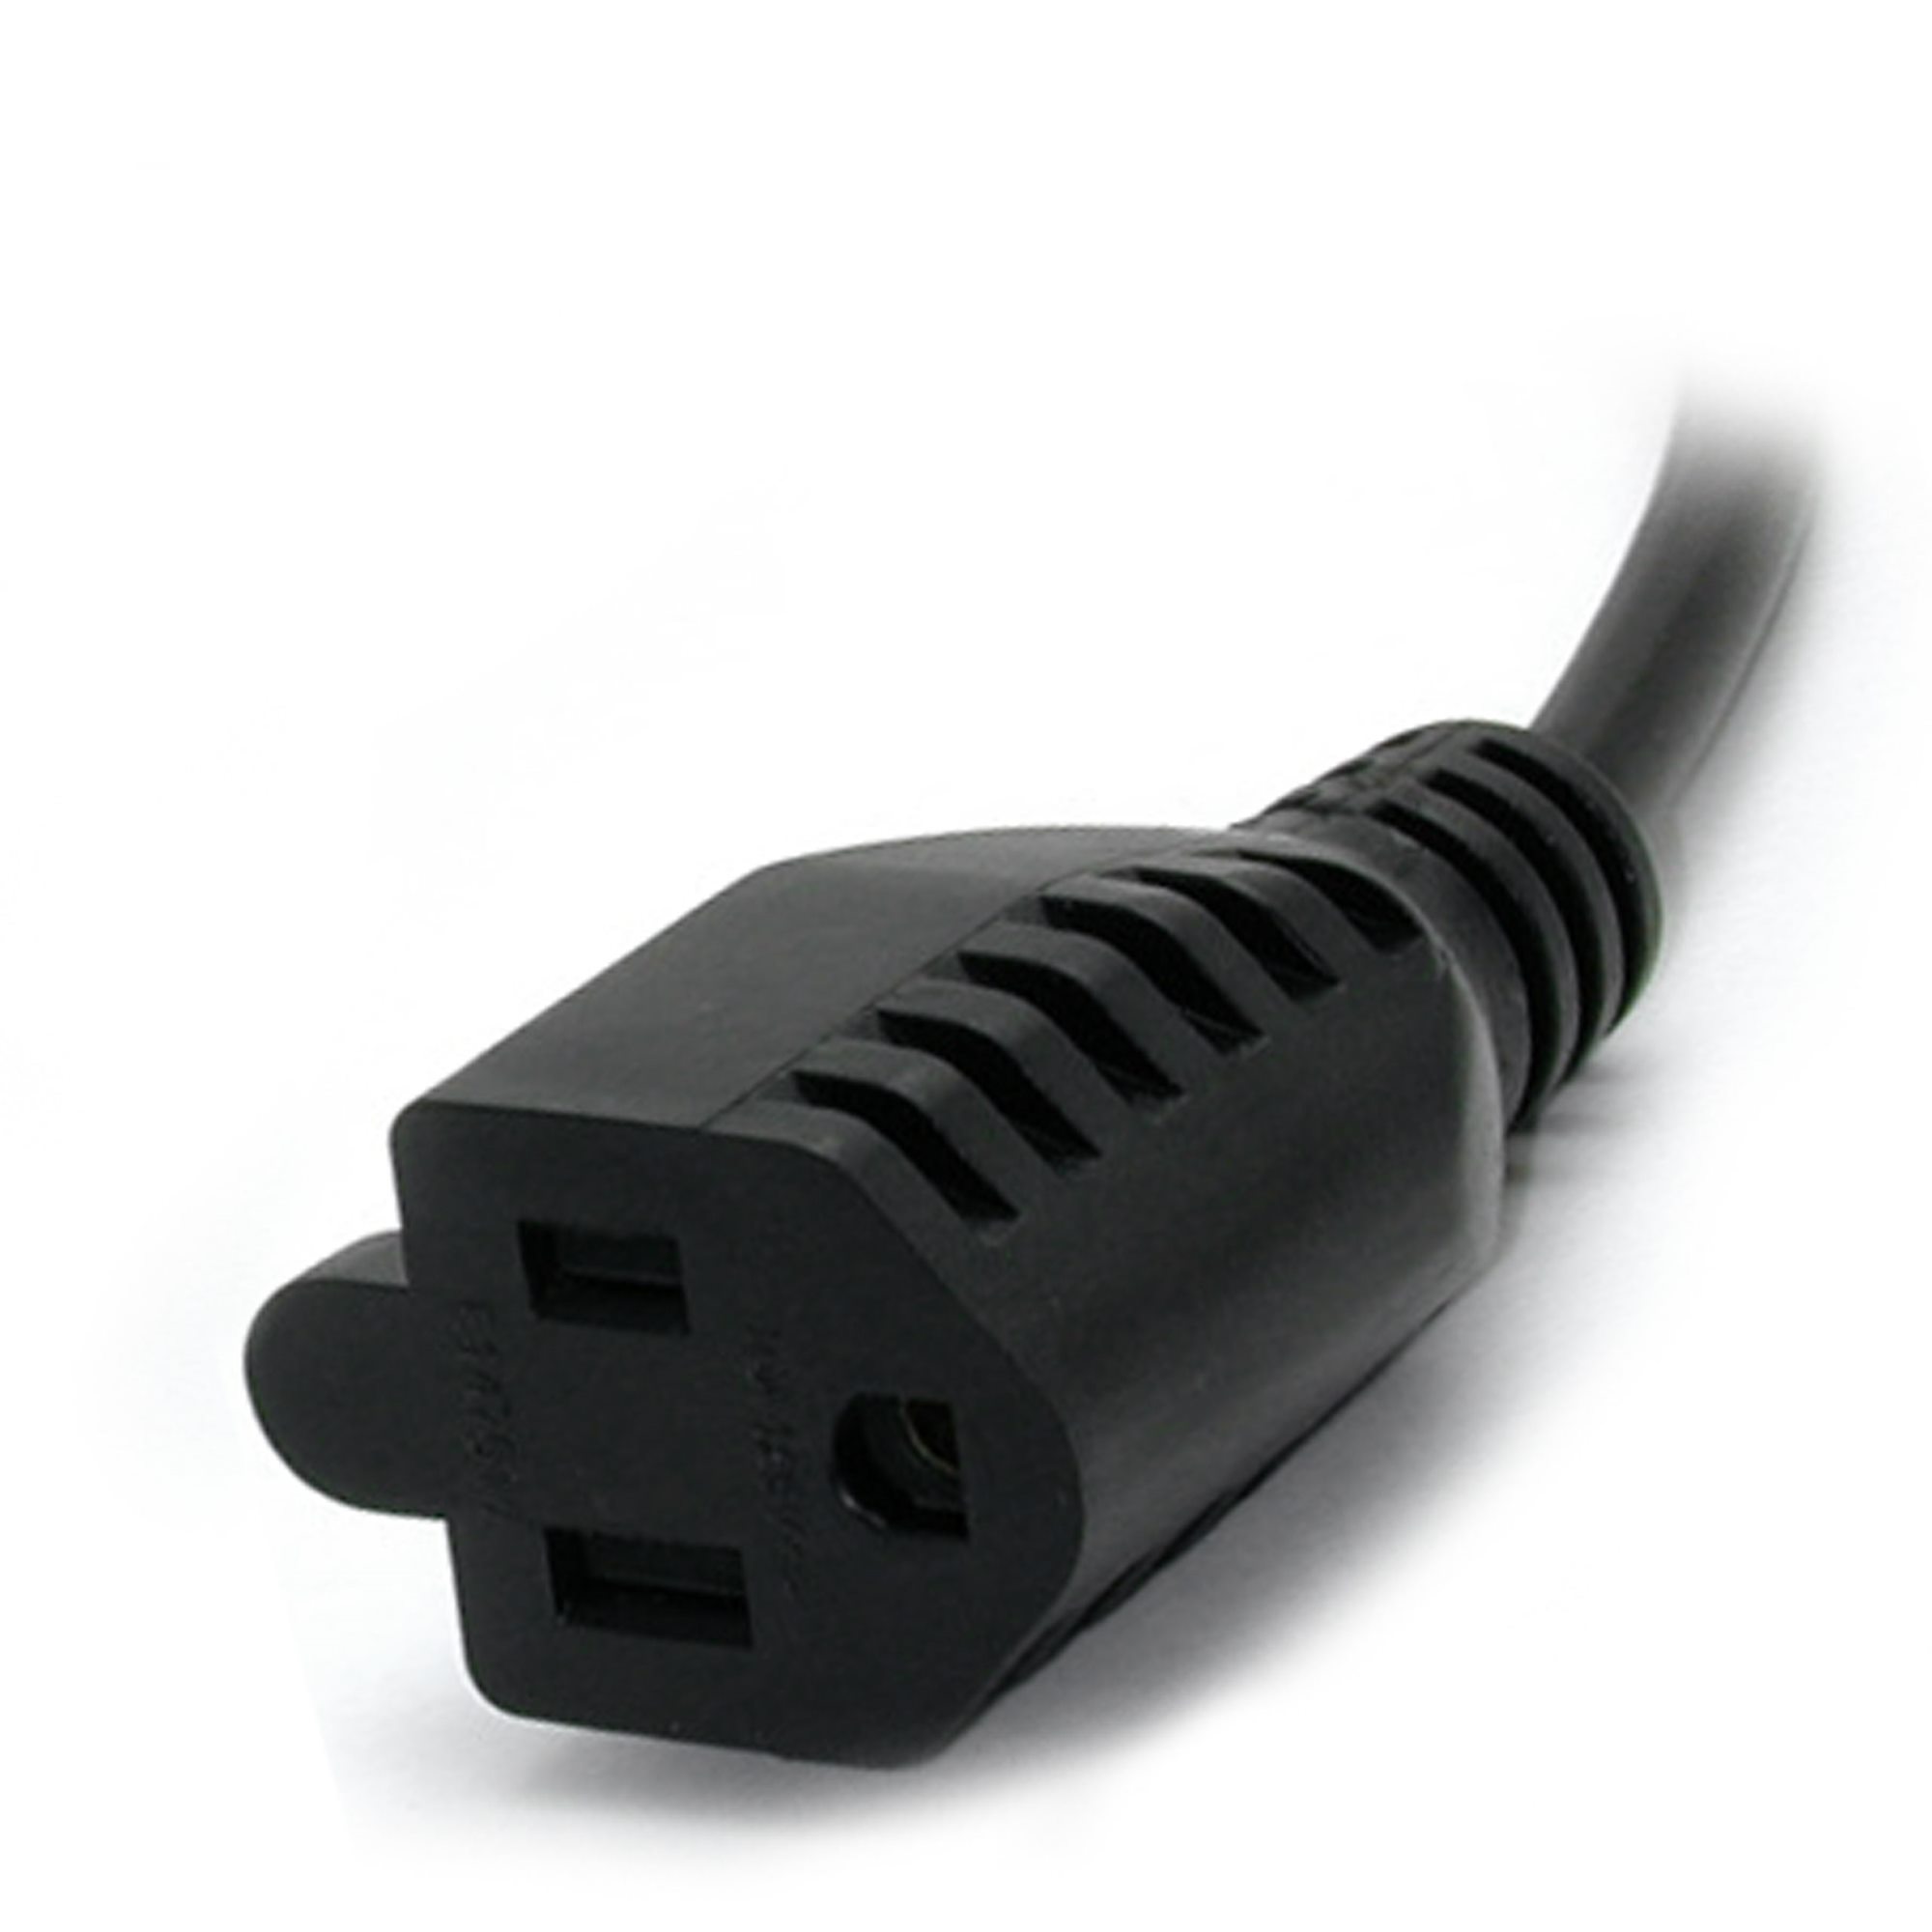 1-FT IEC320 C14 Plug To 3-Prong NEMA 5-15 Outlet Power Adapter Cord 